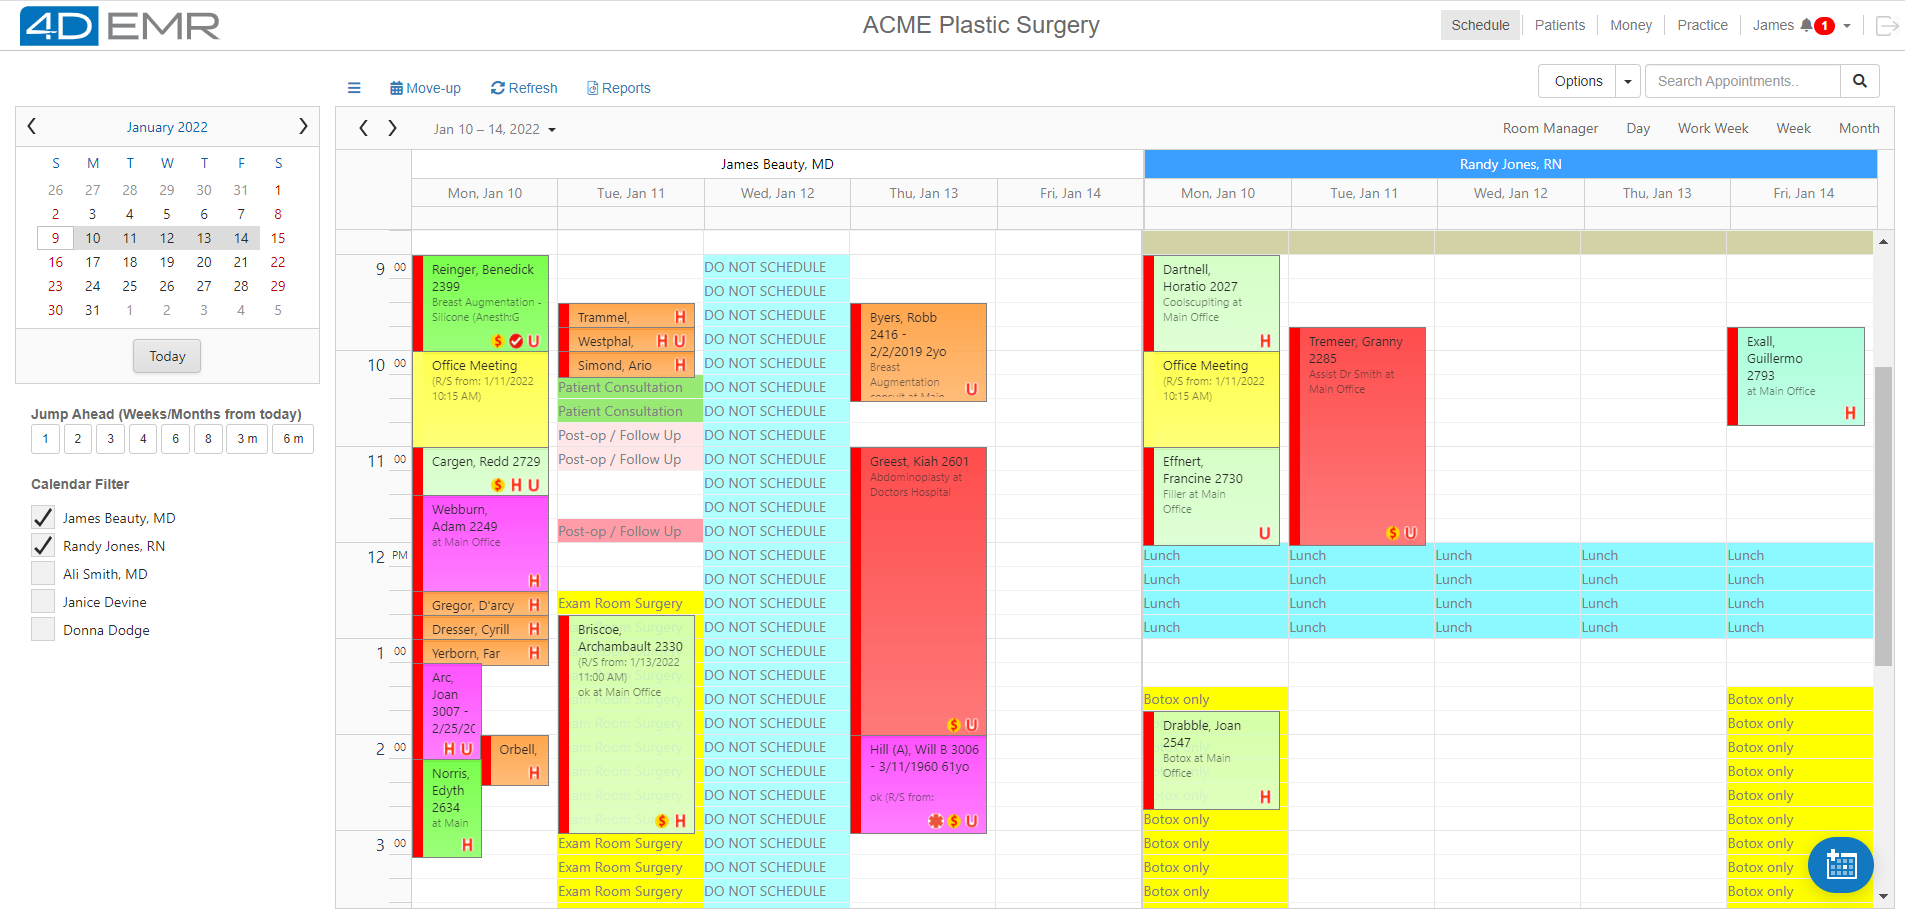 Scheduling page allows viewing side-by-side all doctors, staff, equipment and room calendars.